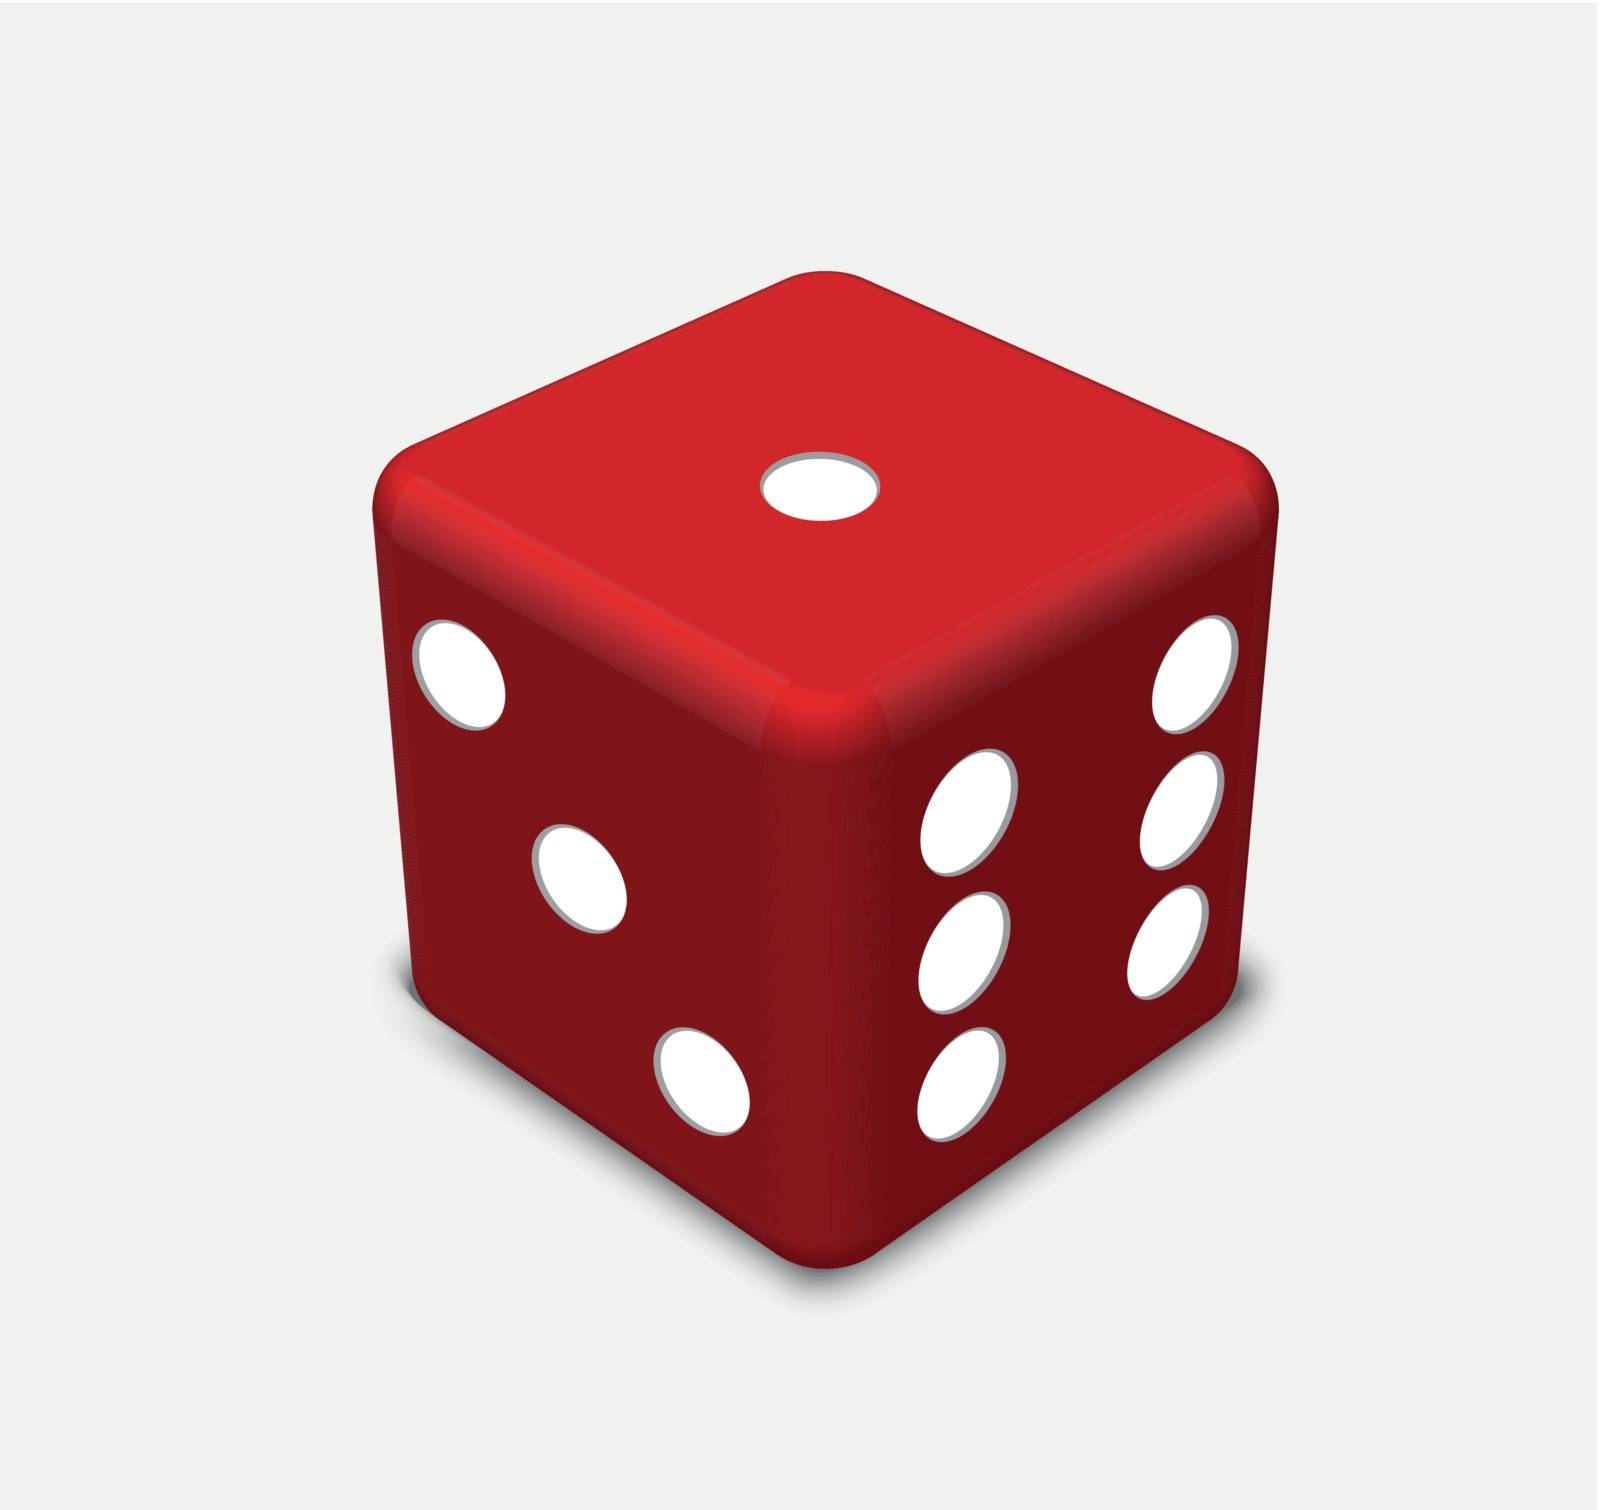 EPS 10 Vector Illustration - red dice isolated on wwhite background